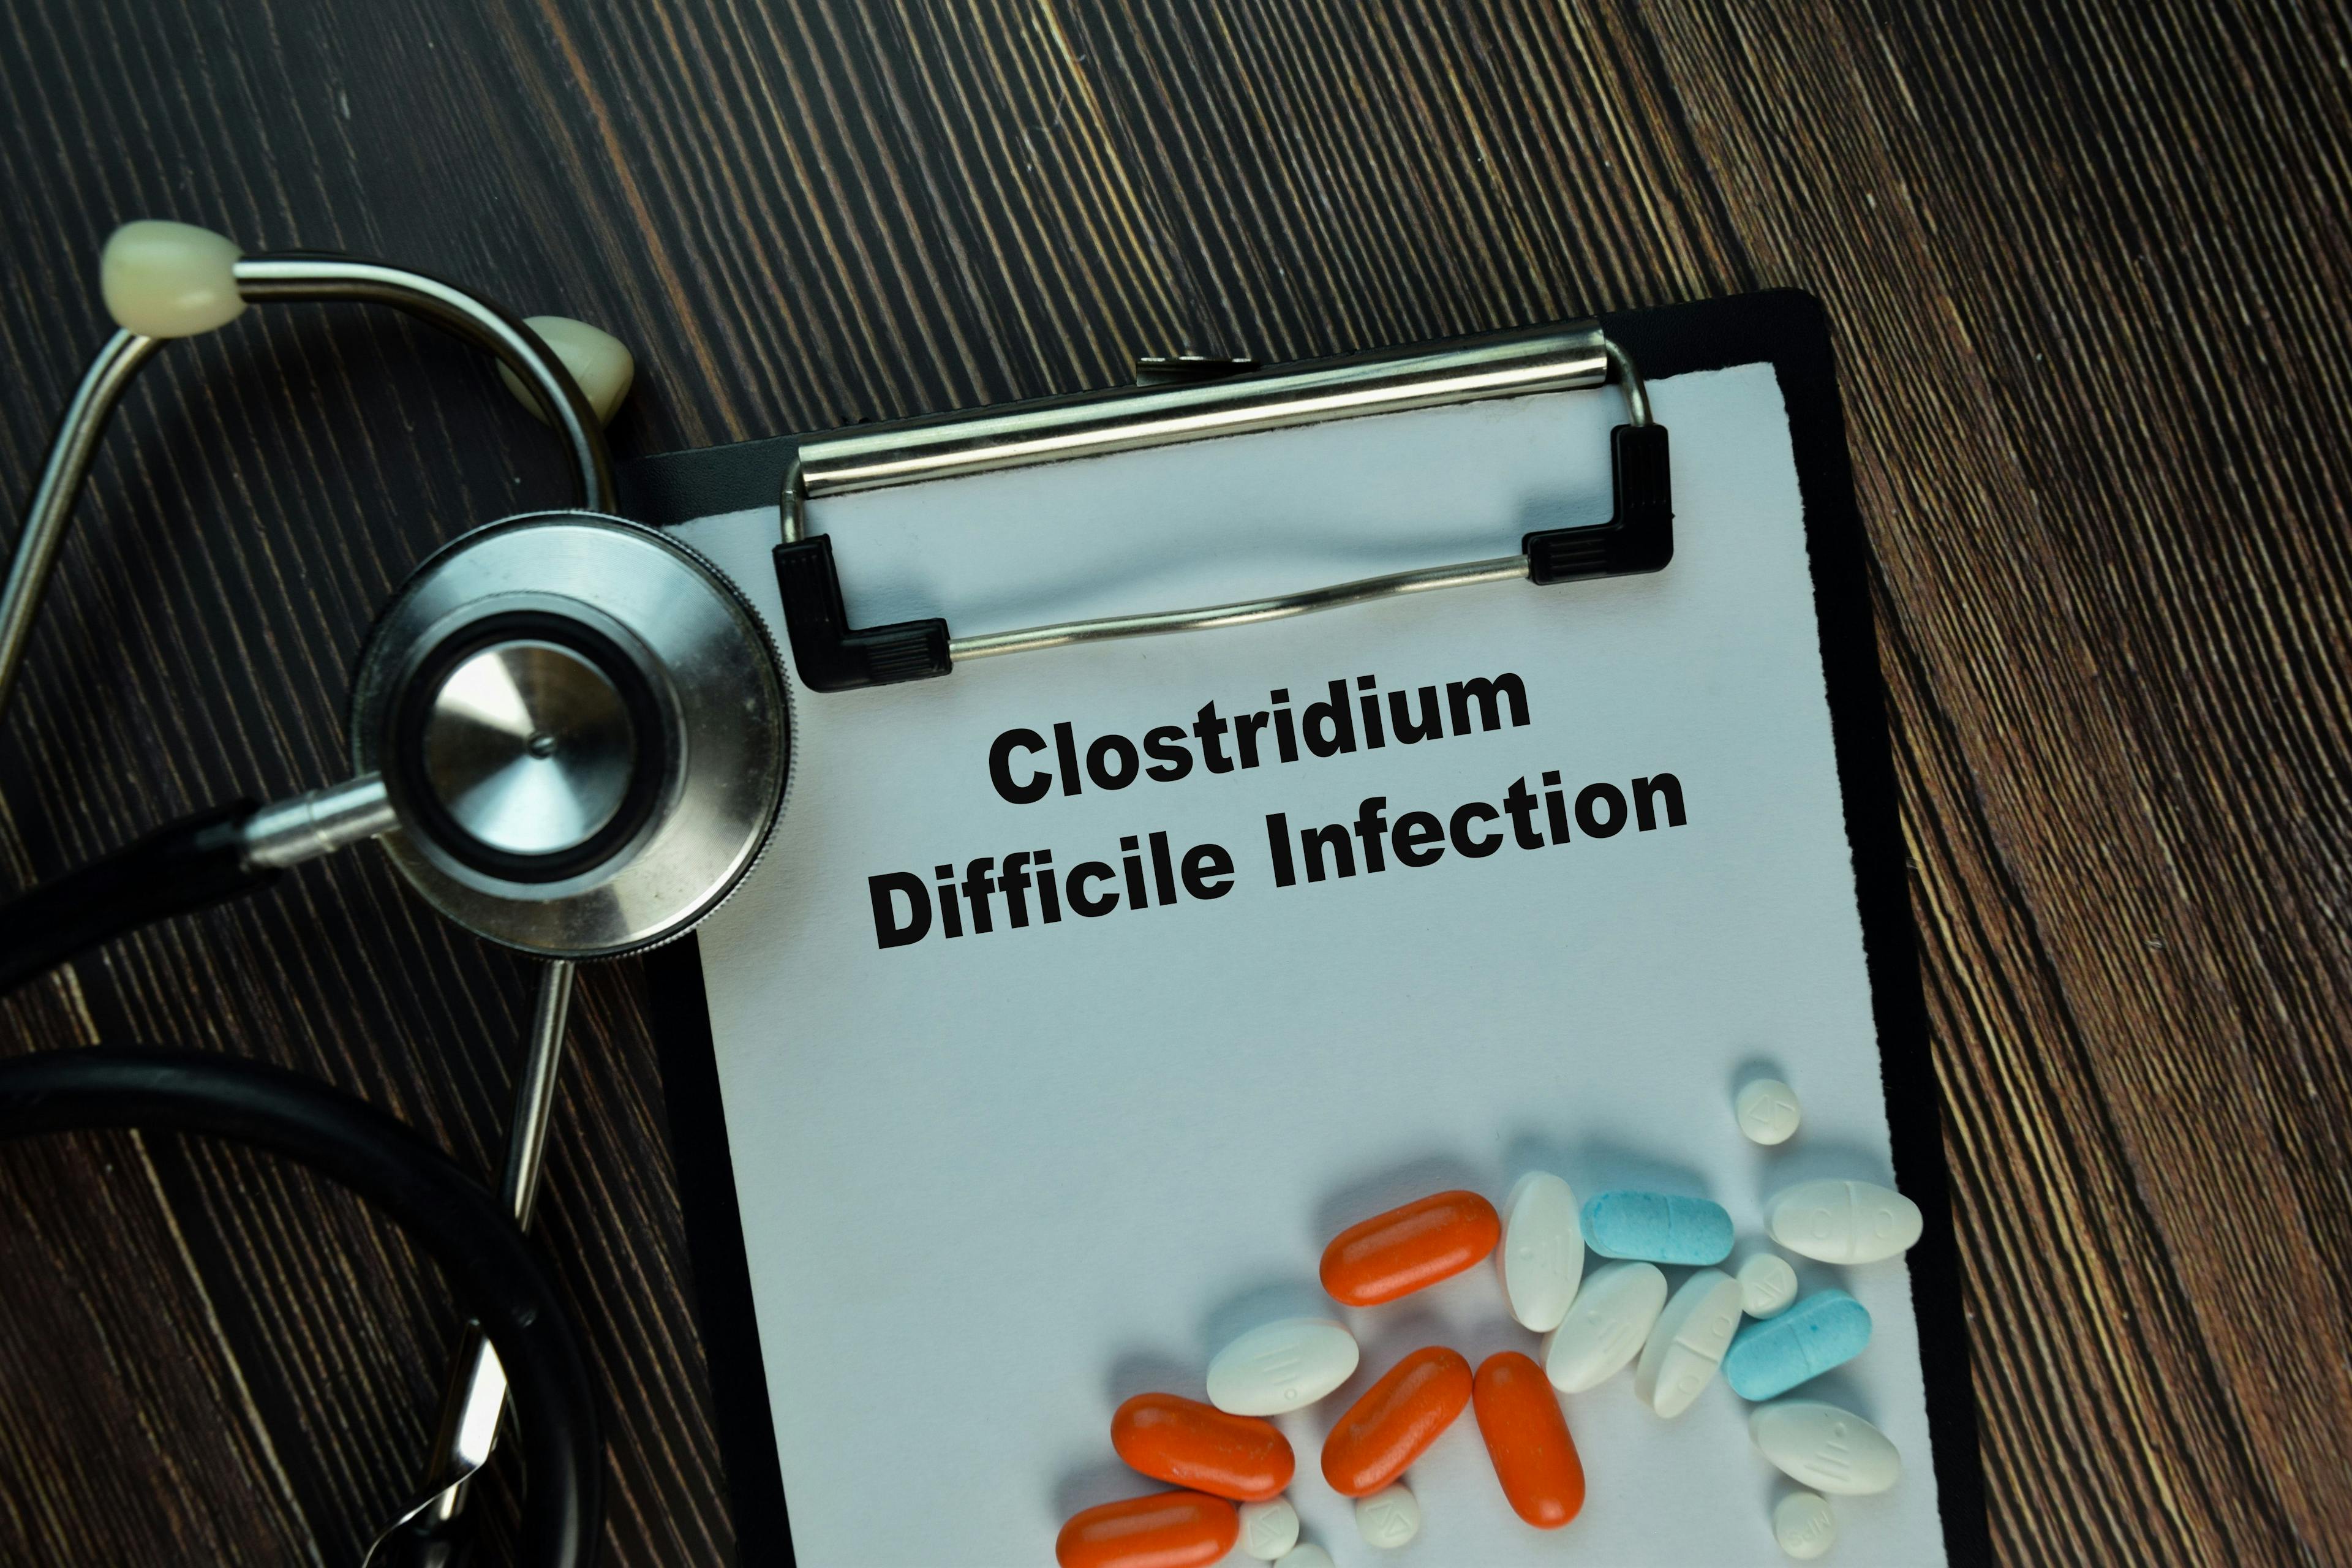 Clostridium Difficile Infection write on sticky notes isolated on Wooden Table. Medical or Healthcare concept | Image Credit: syahrir - stock.adobe.com